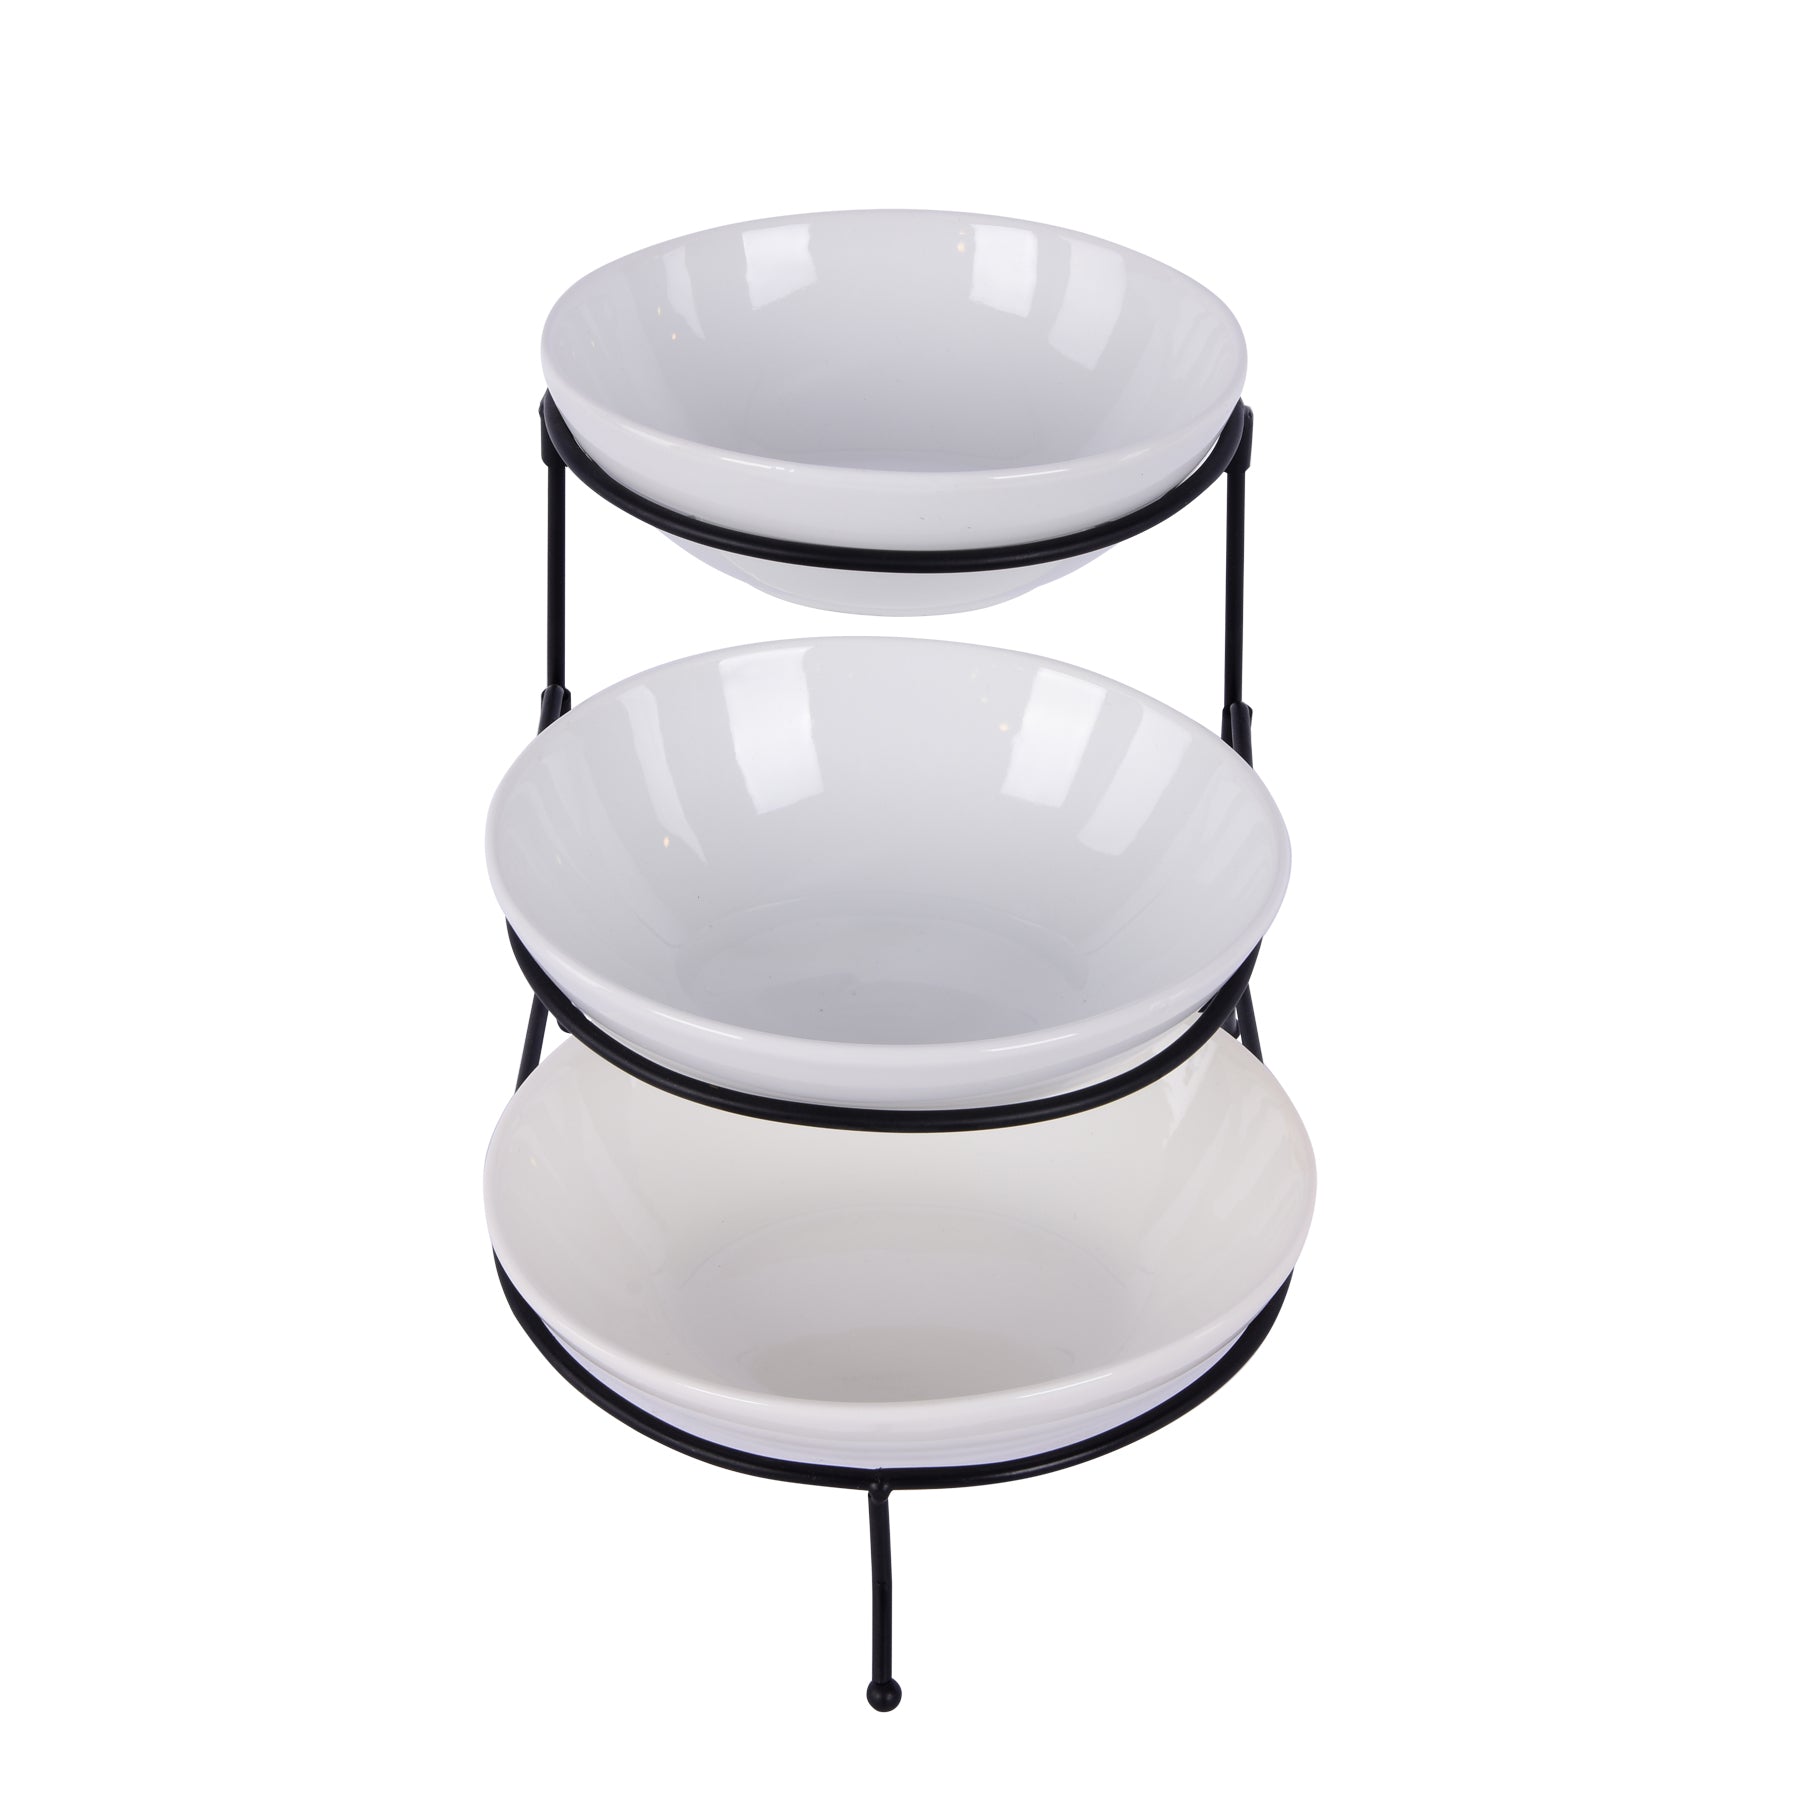 3 Pcs Bowls set with stand, White